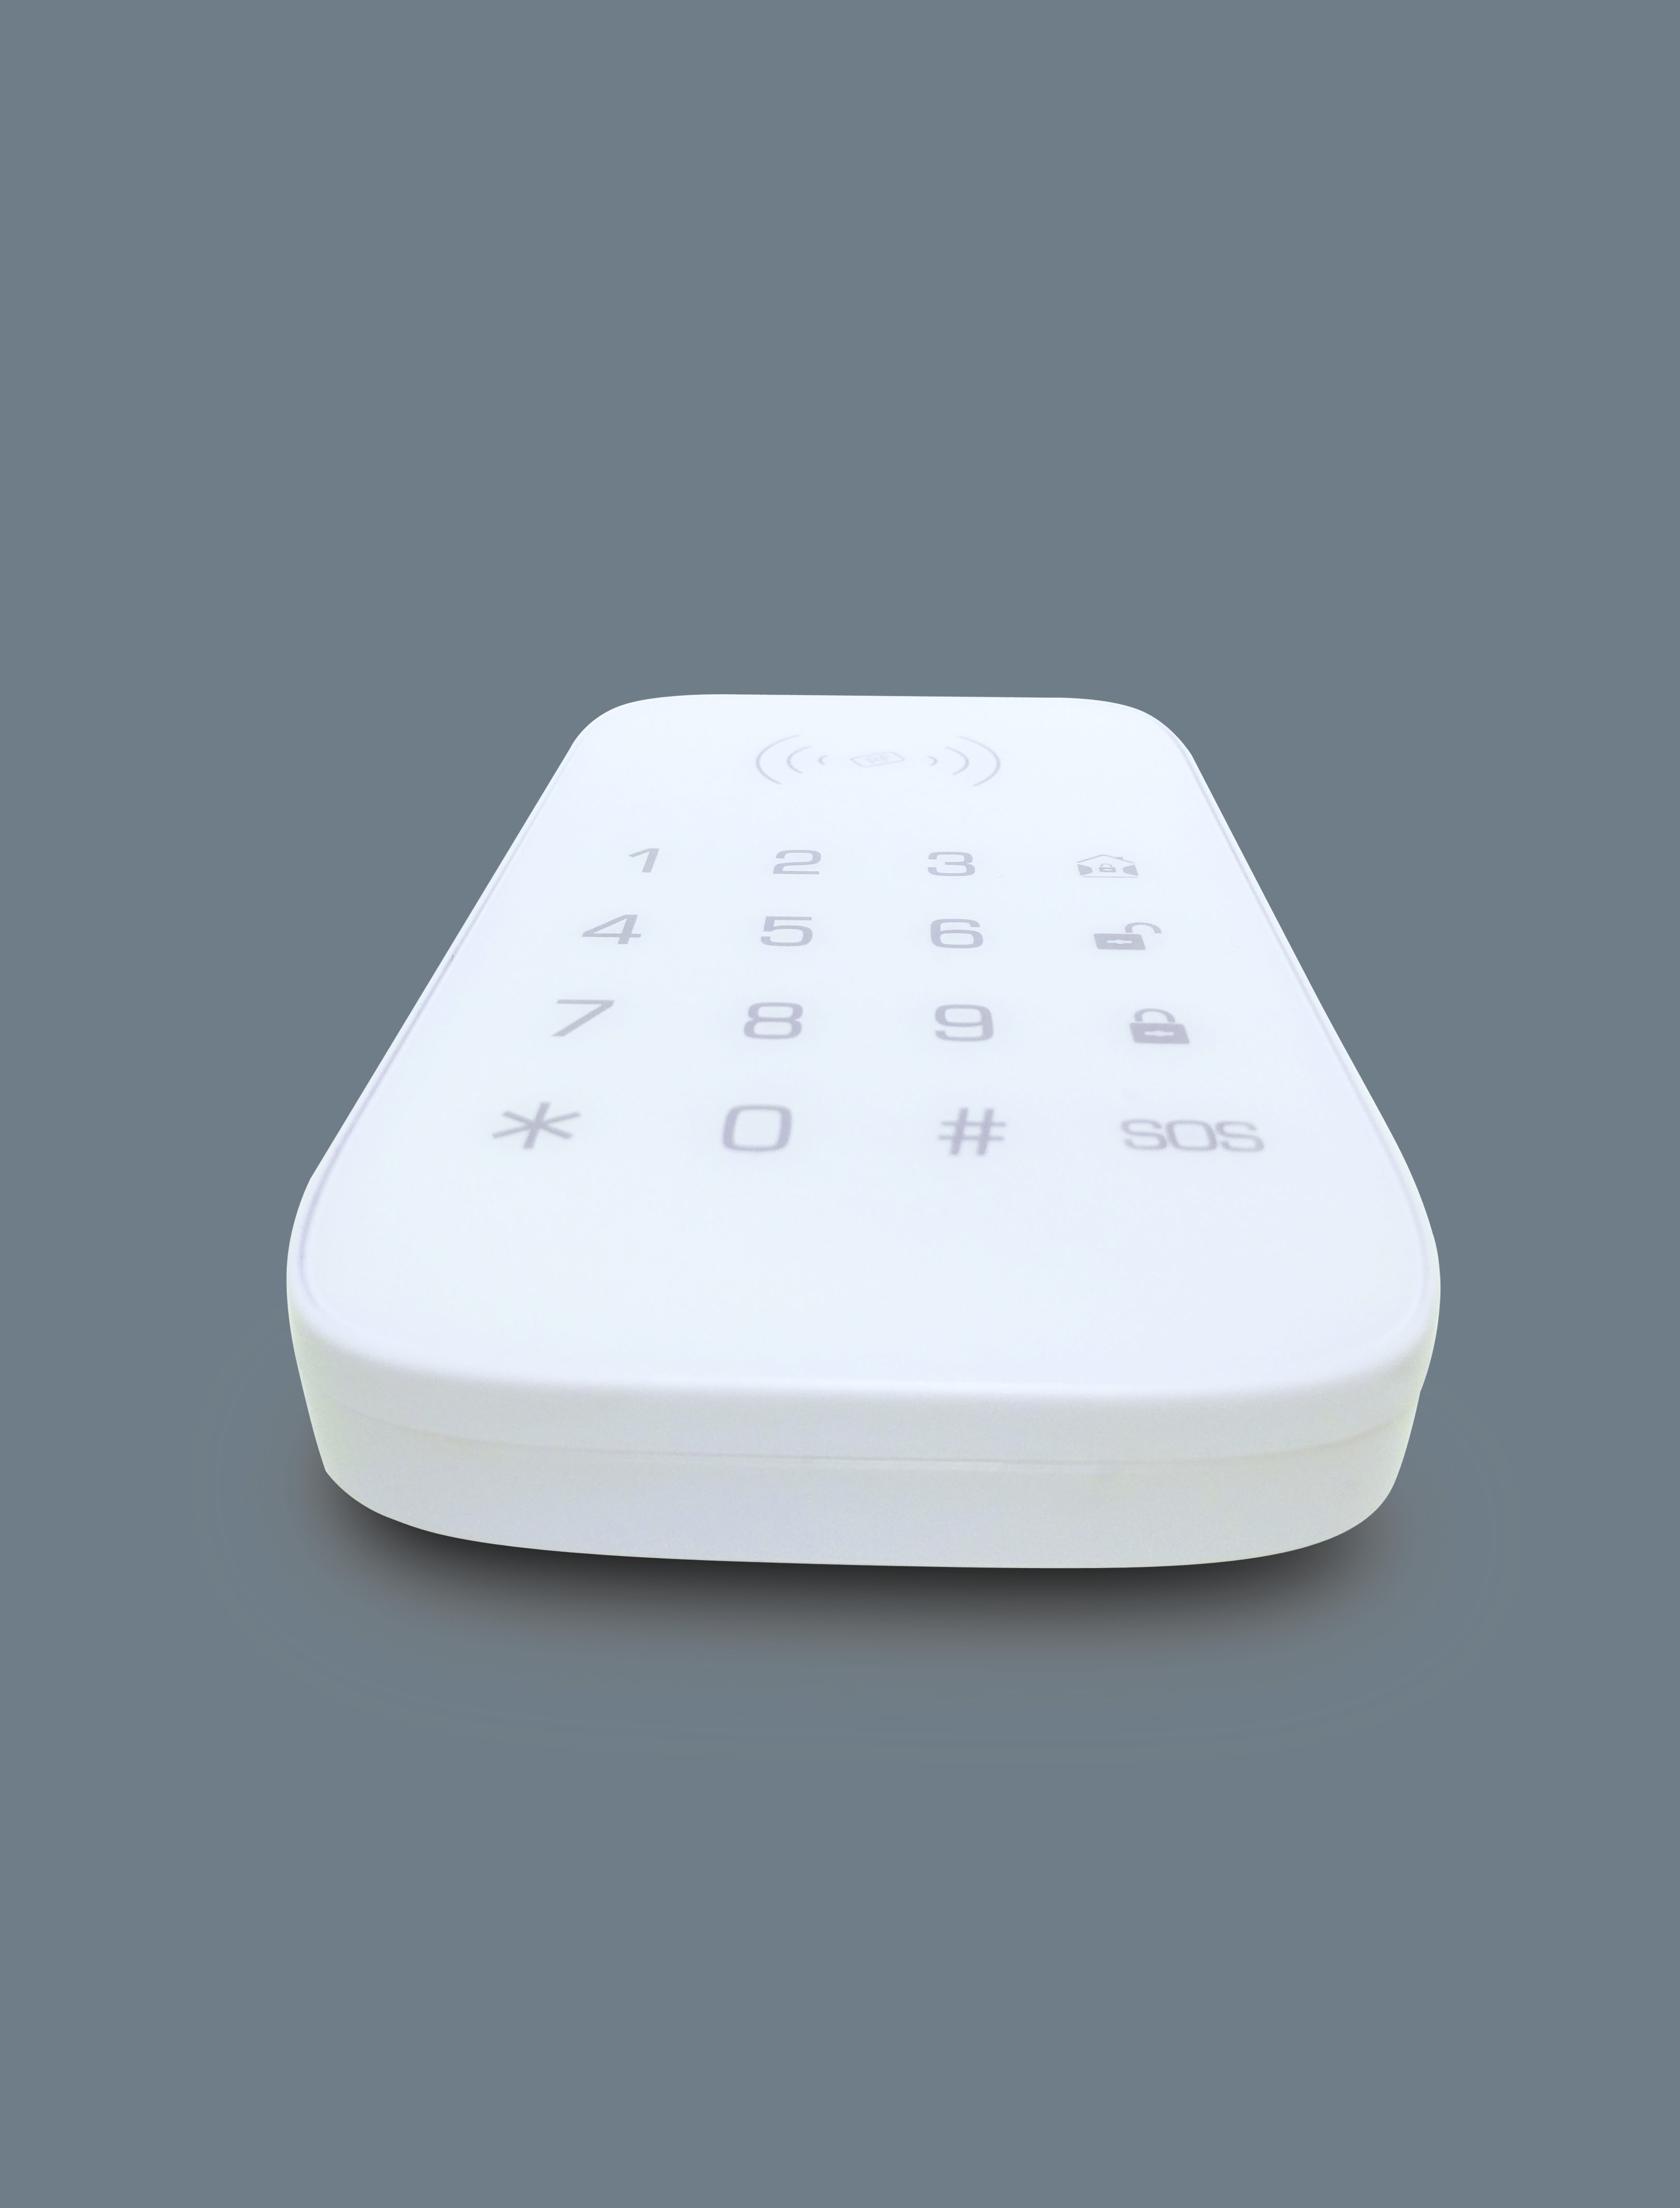 YAOSE 433MHz Wireless Keypad for Smart Home Security System Extention Keypad for Burglar Fire Alarm Panel Support RFID Key Tag